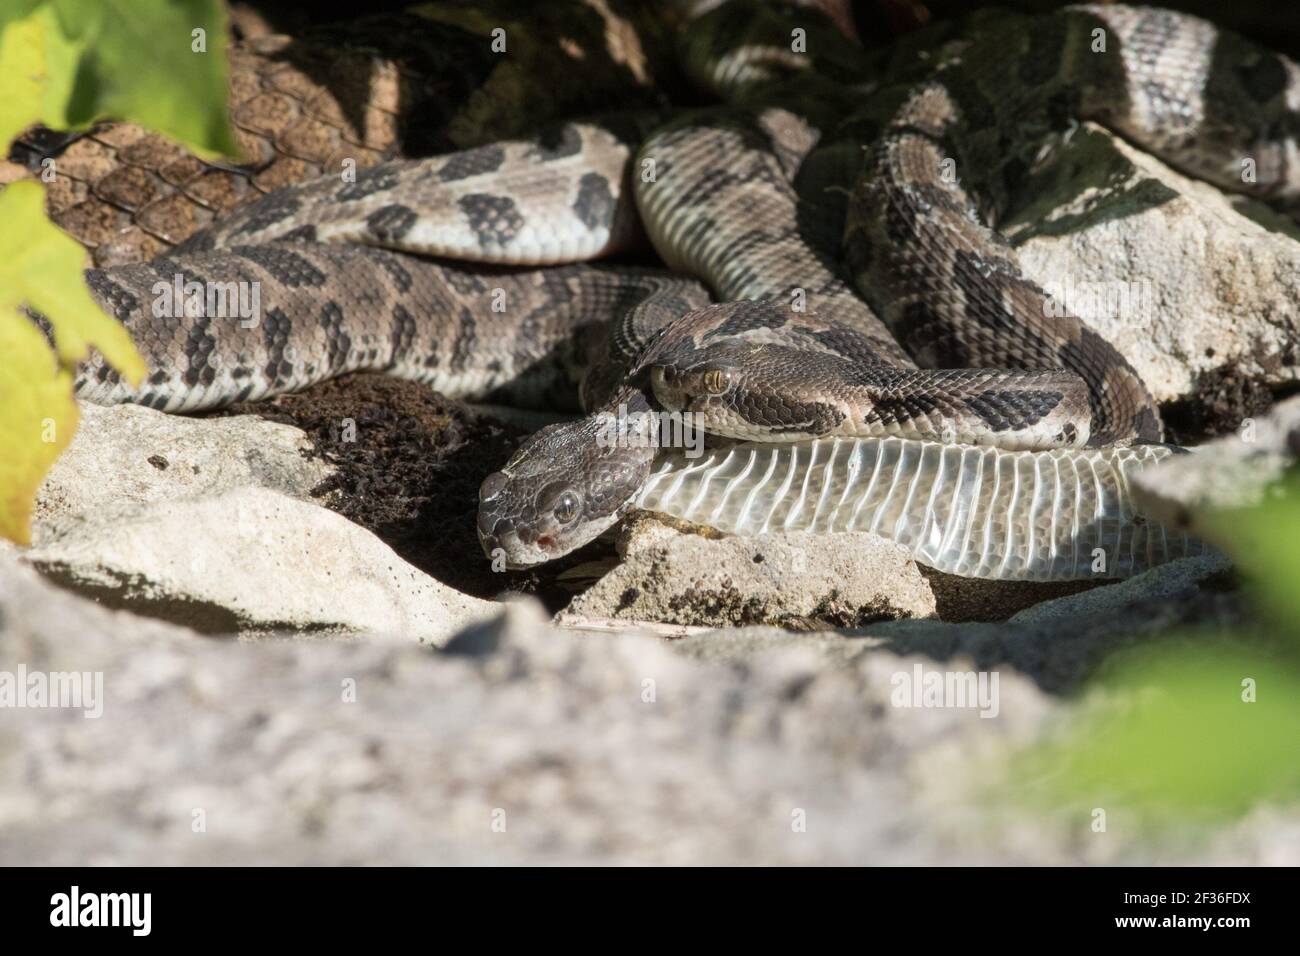 Close-up of newborn timber rattlesnakes, Crotalus horridus, with the mother in the background. Stock Photo